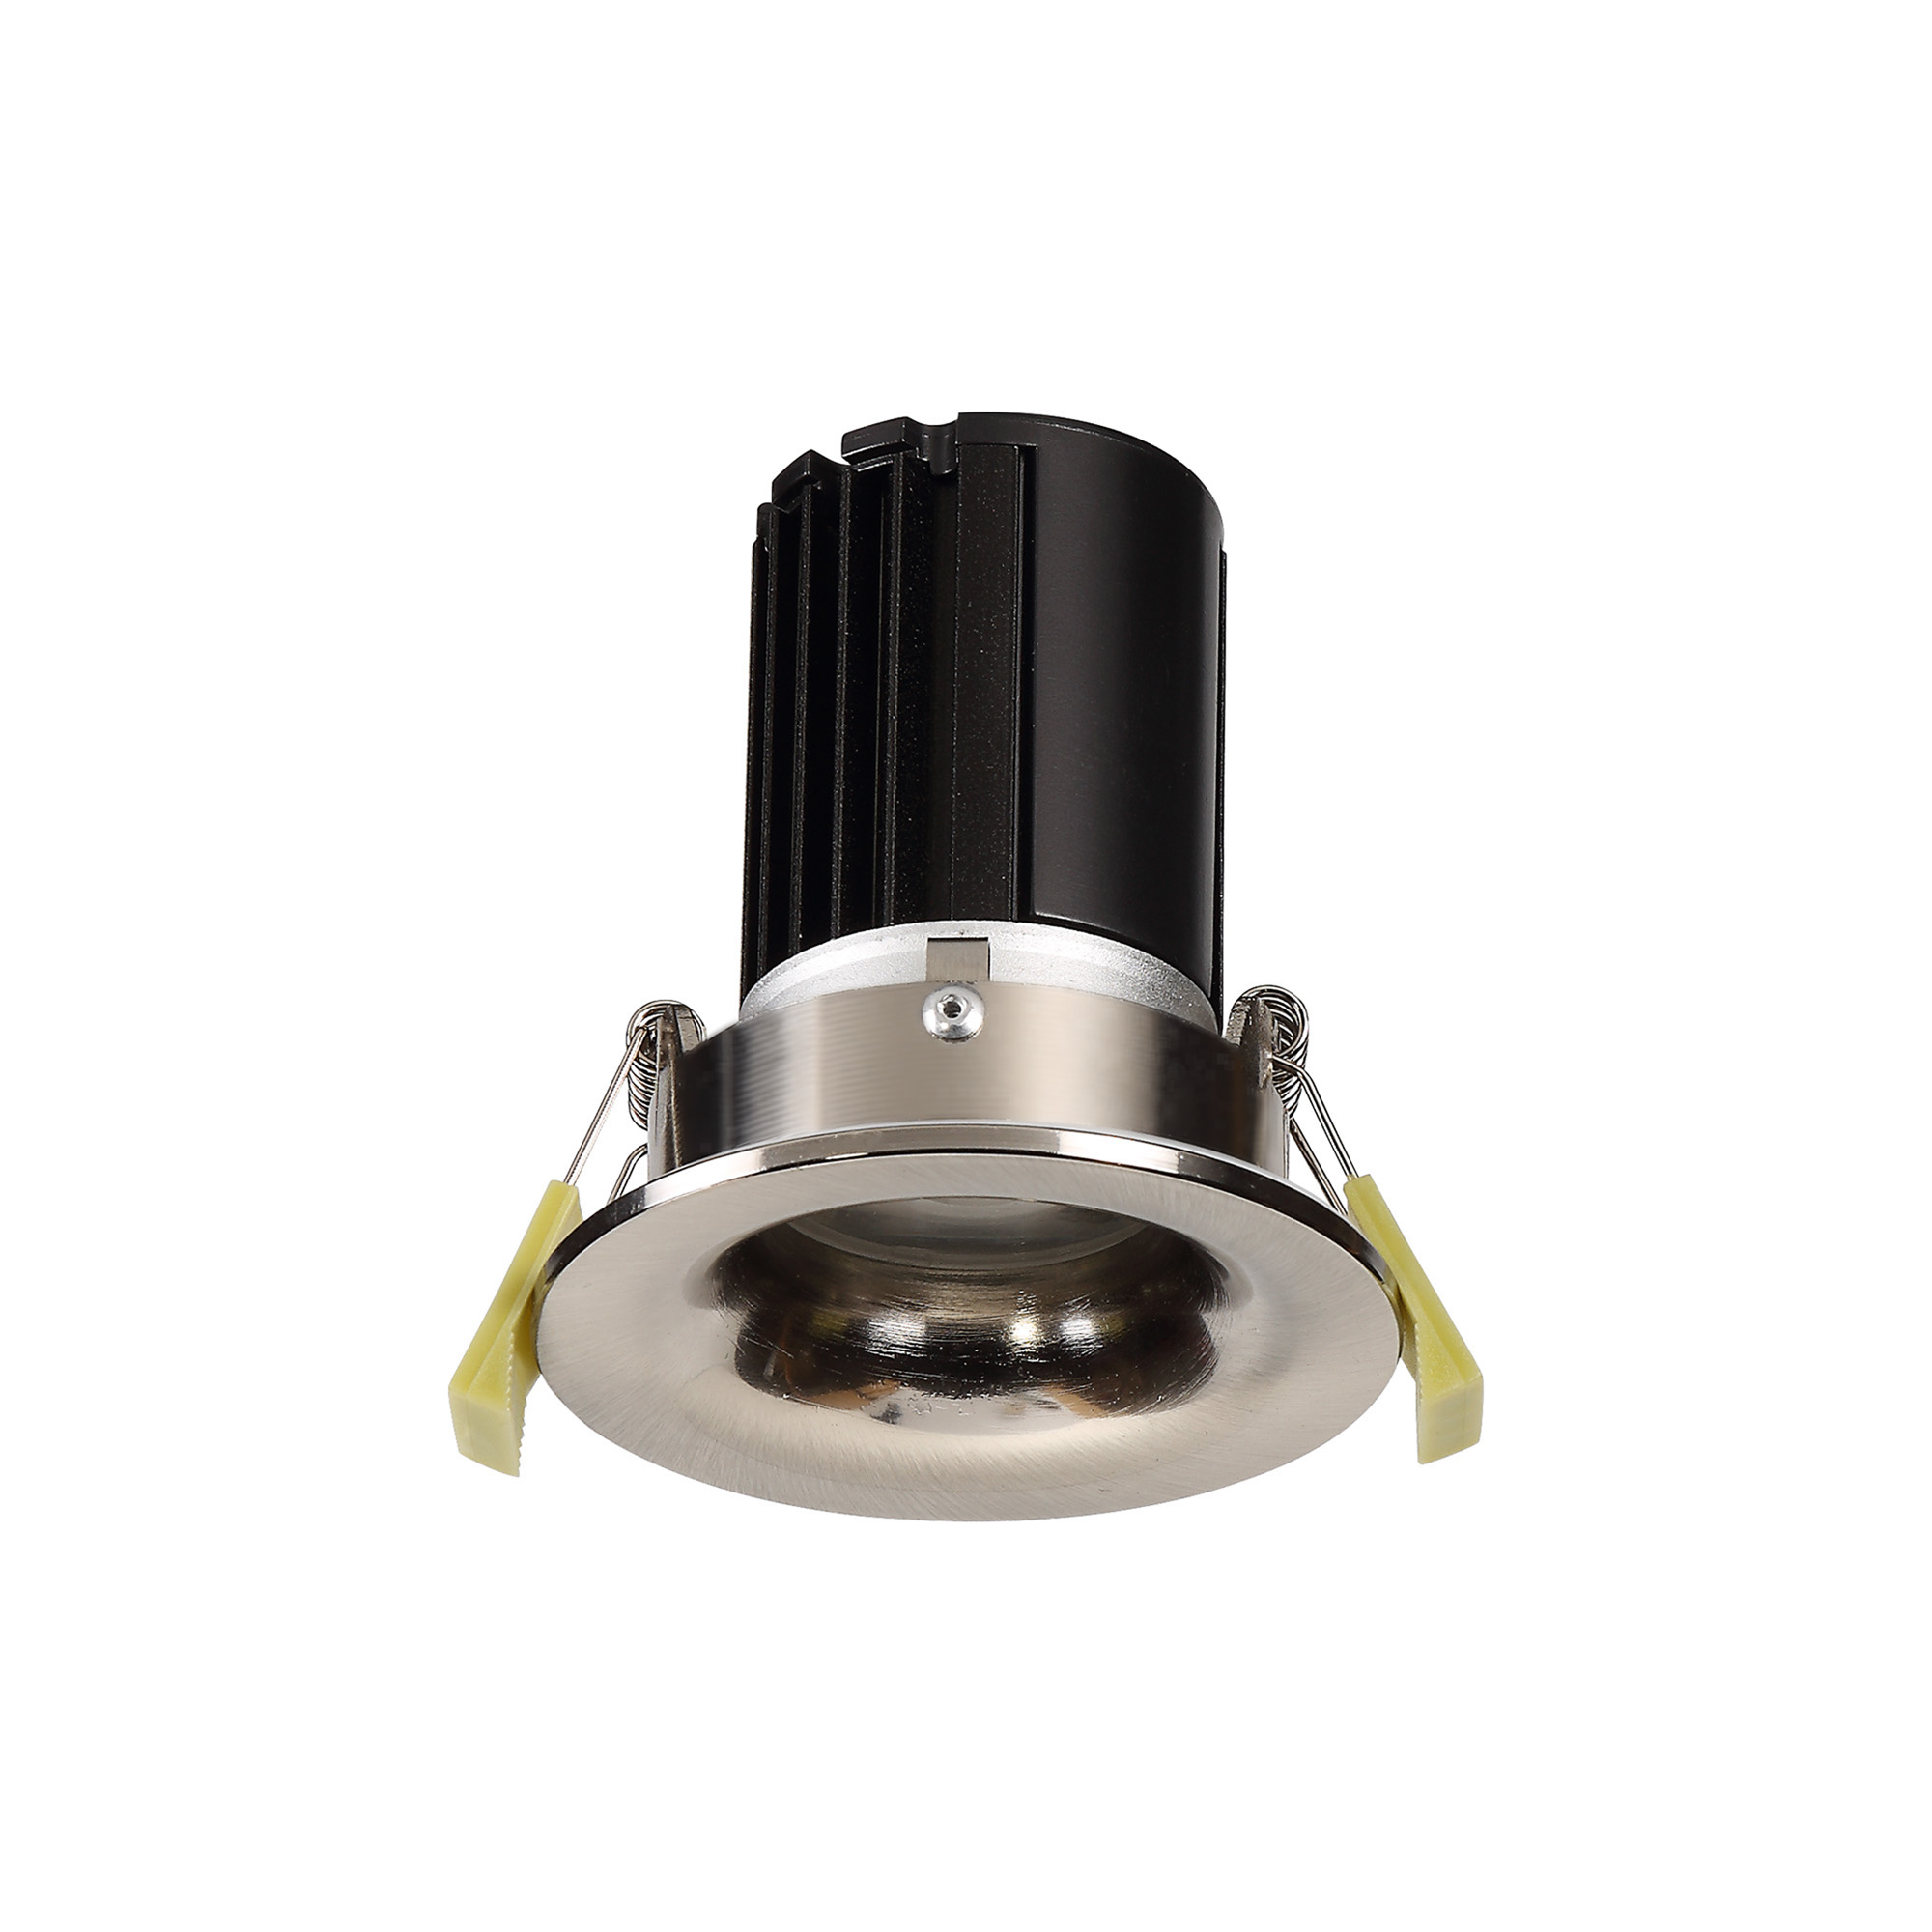 DM200781  Bruve 10 Tridonic powered 10W 2700K 750lm 12° CRI>90 LED Engine Satin Nickel Fixed Round Recessed Downlight, Inner Glass cover, IP65